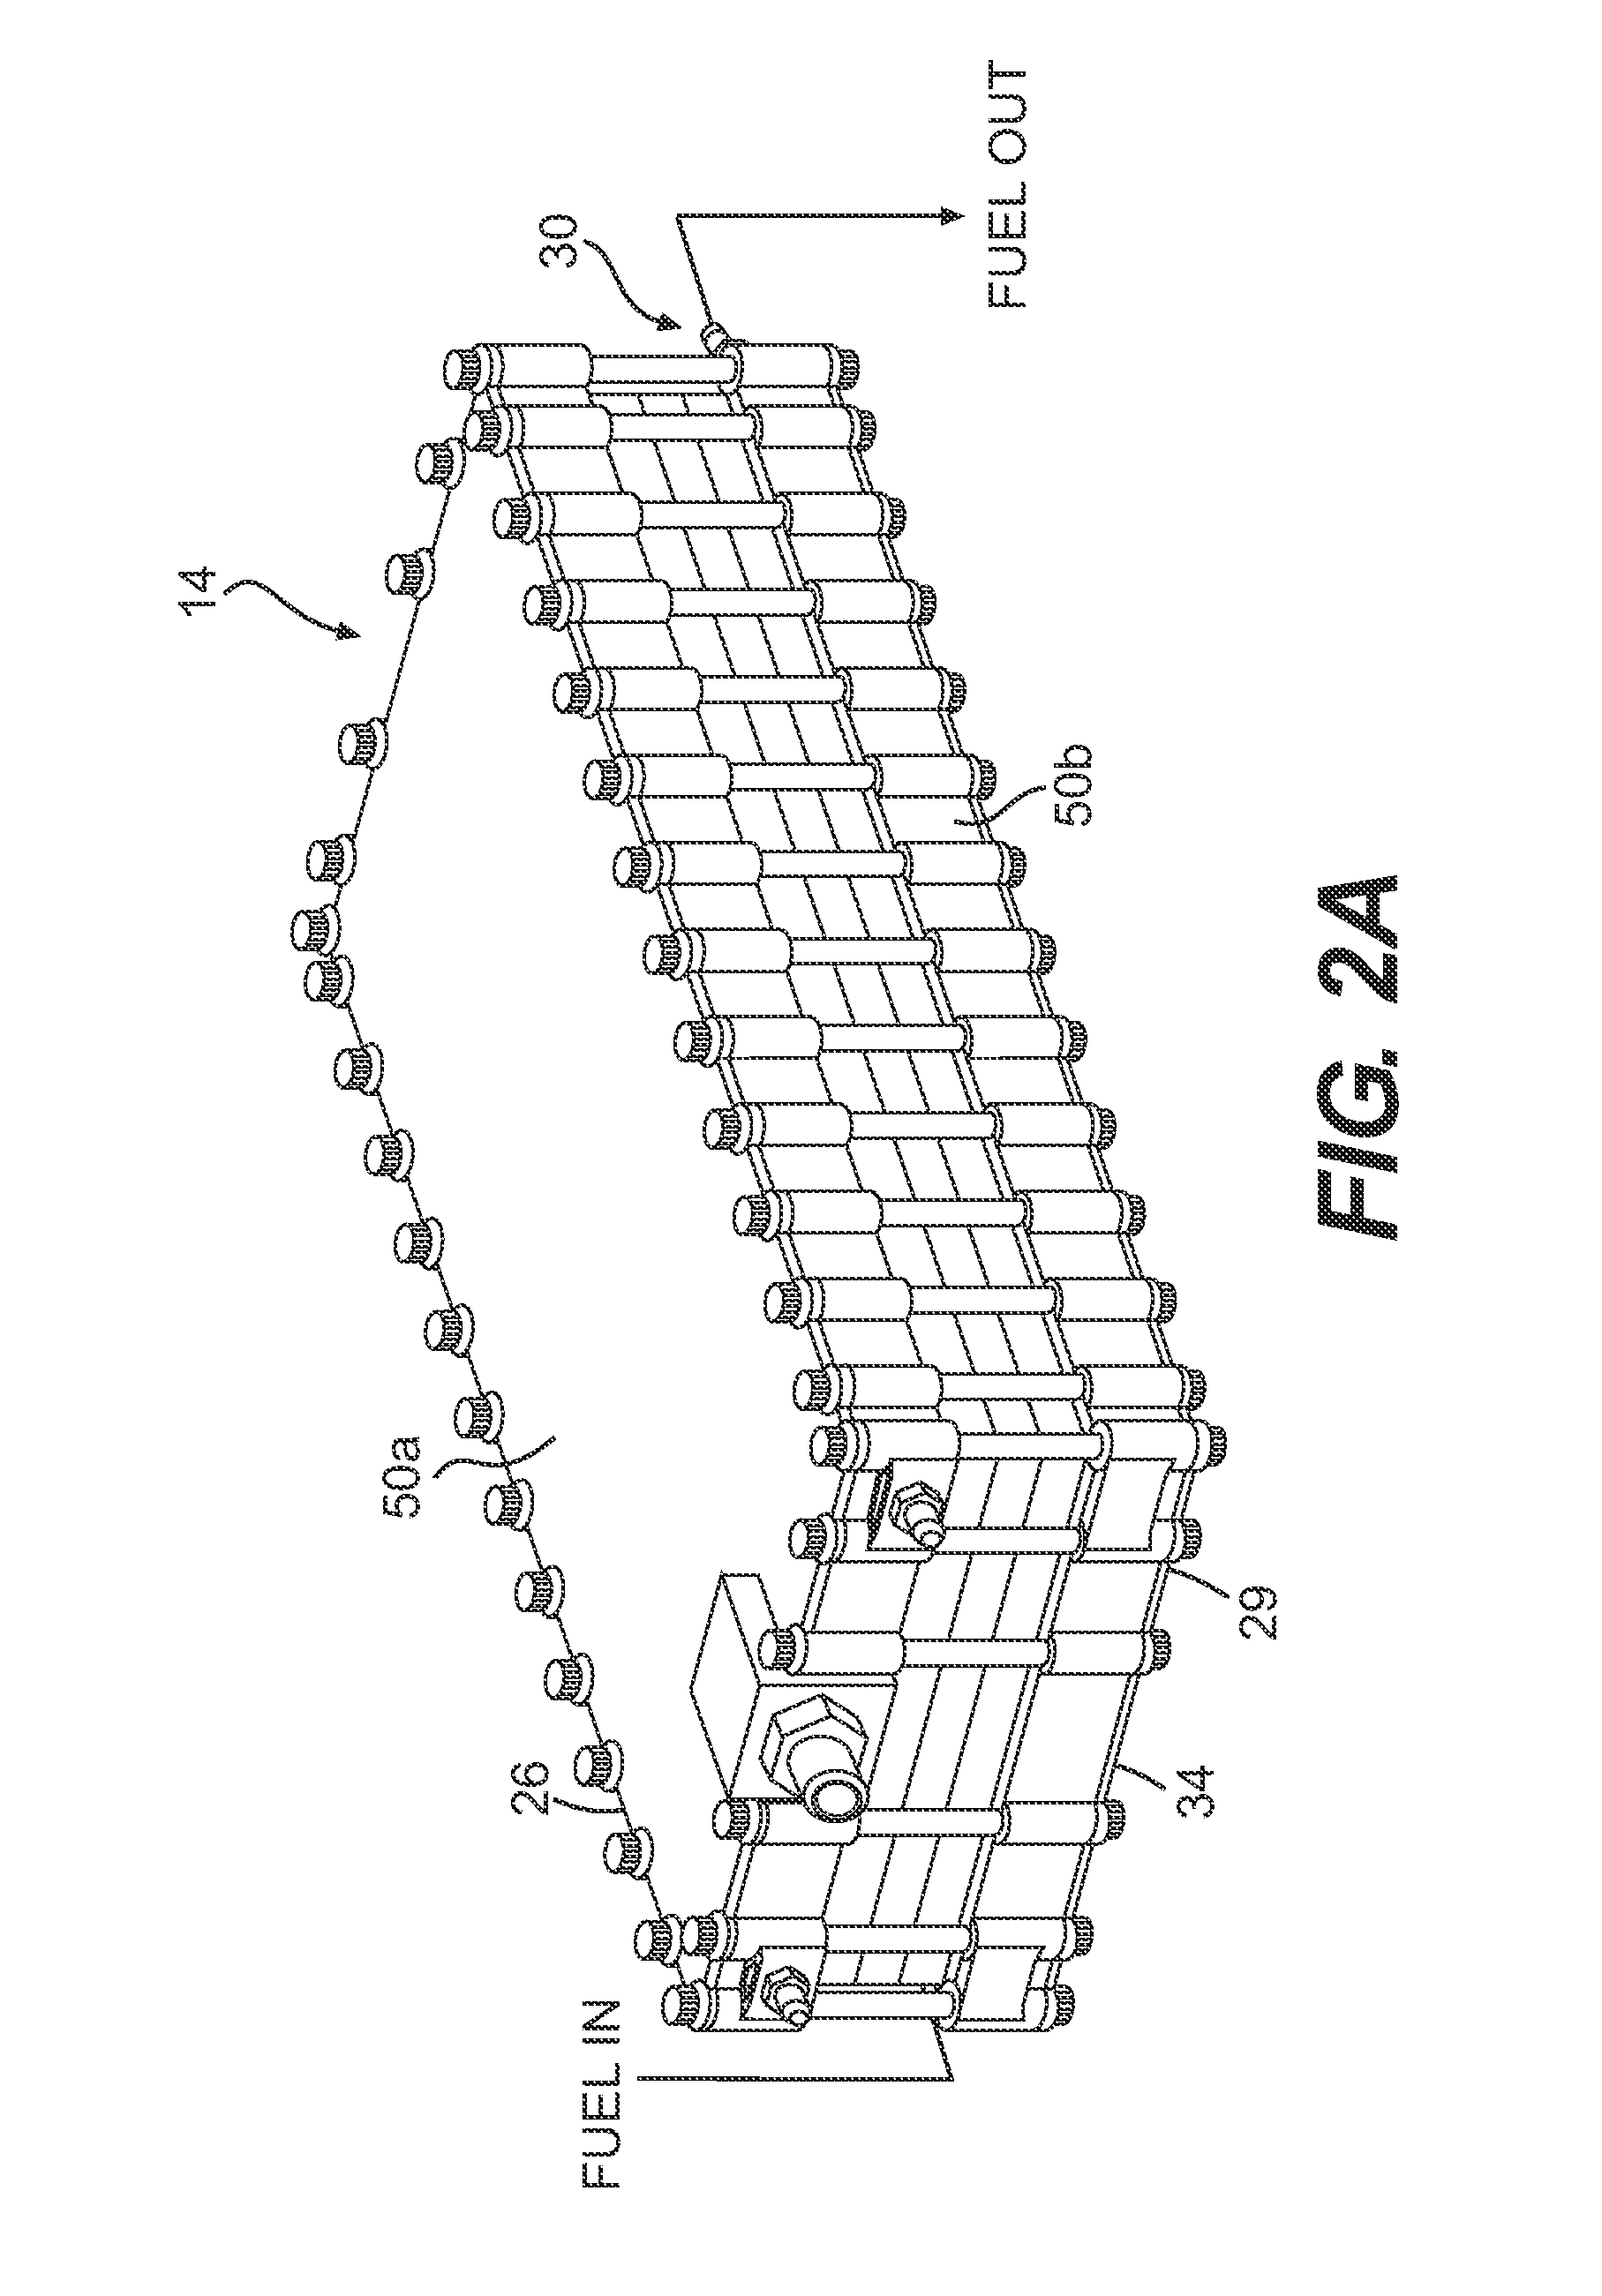 Fuel deoxygenation system with non-metallic fuel plate assembly